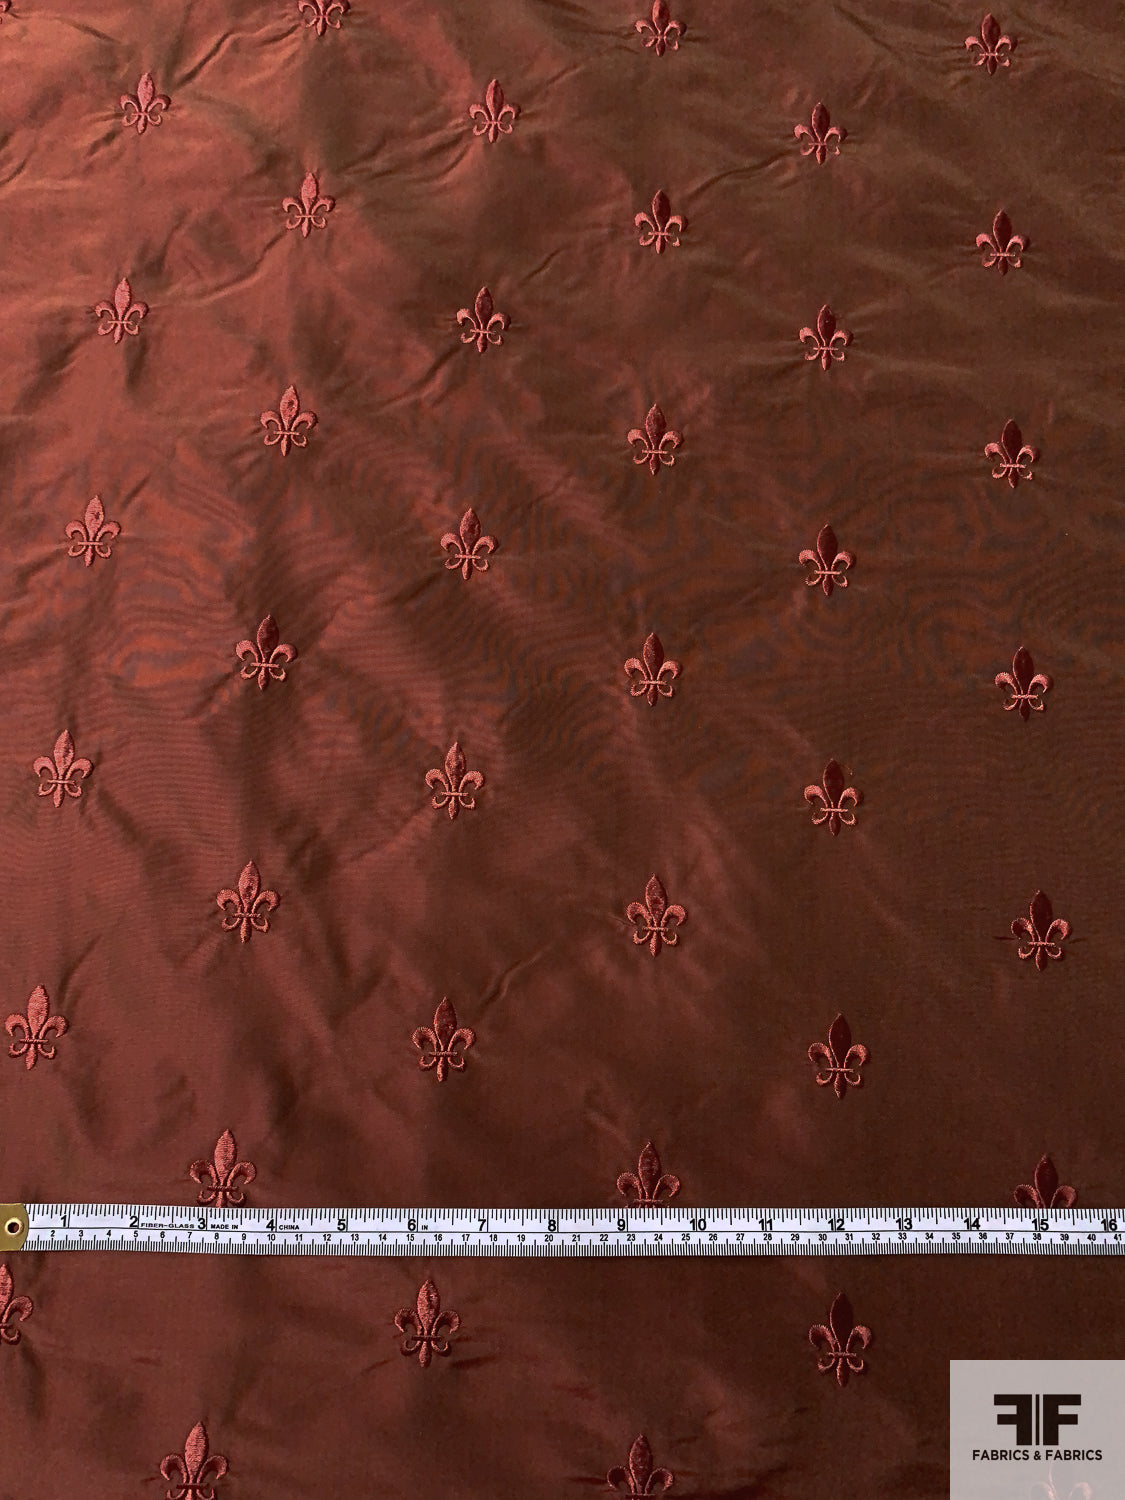 Chocolate Brown Iridescent Faux Taffeta Silk Floral Embroidery Fabric